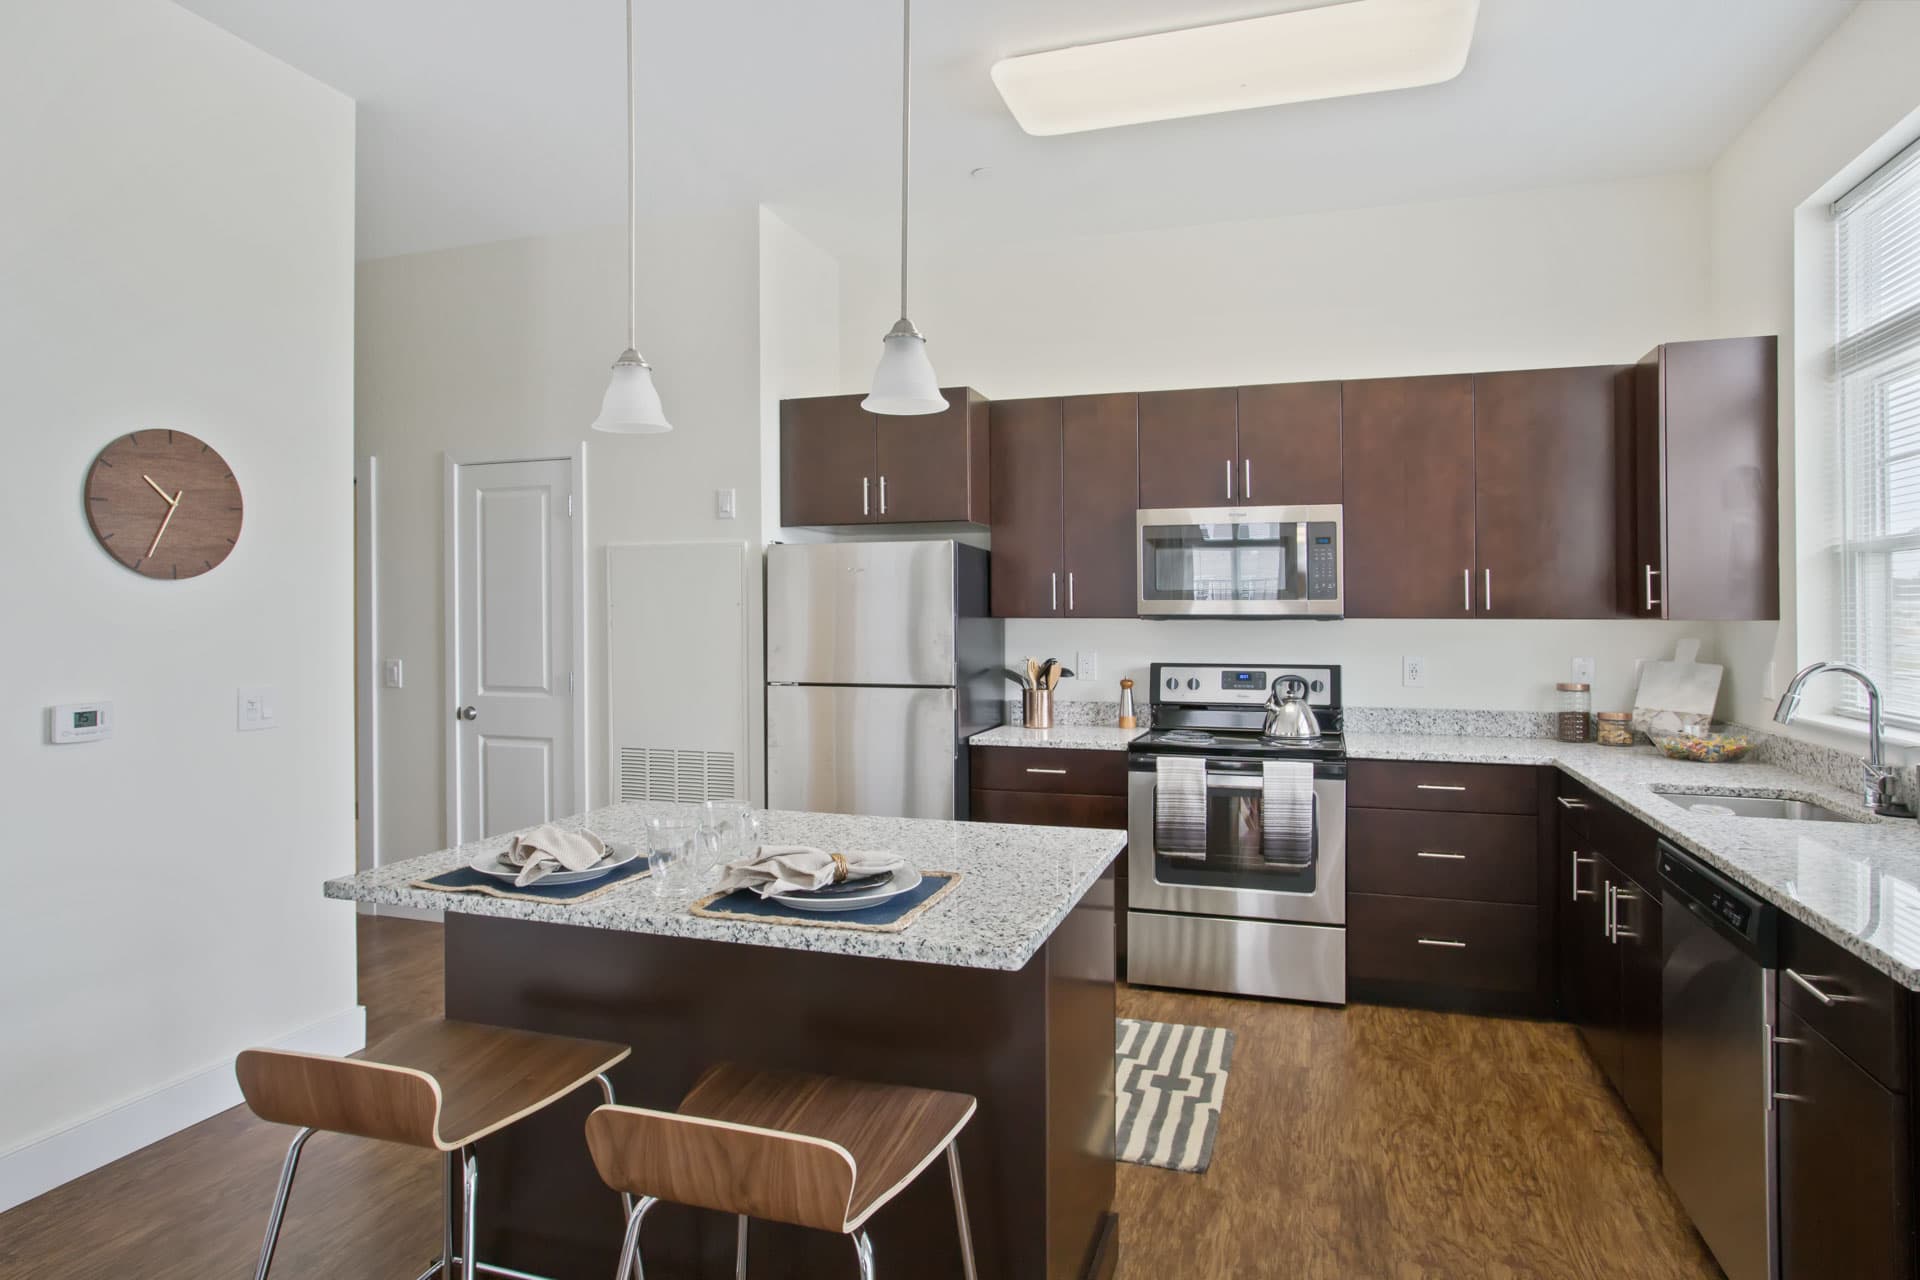 Luxury kitchen inside the Corsa Apartments in Salem, New Hampshire